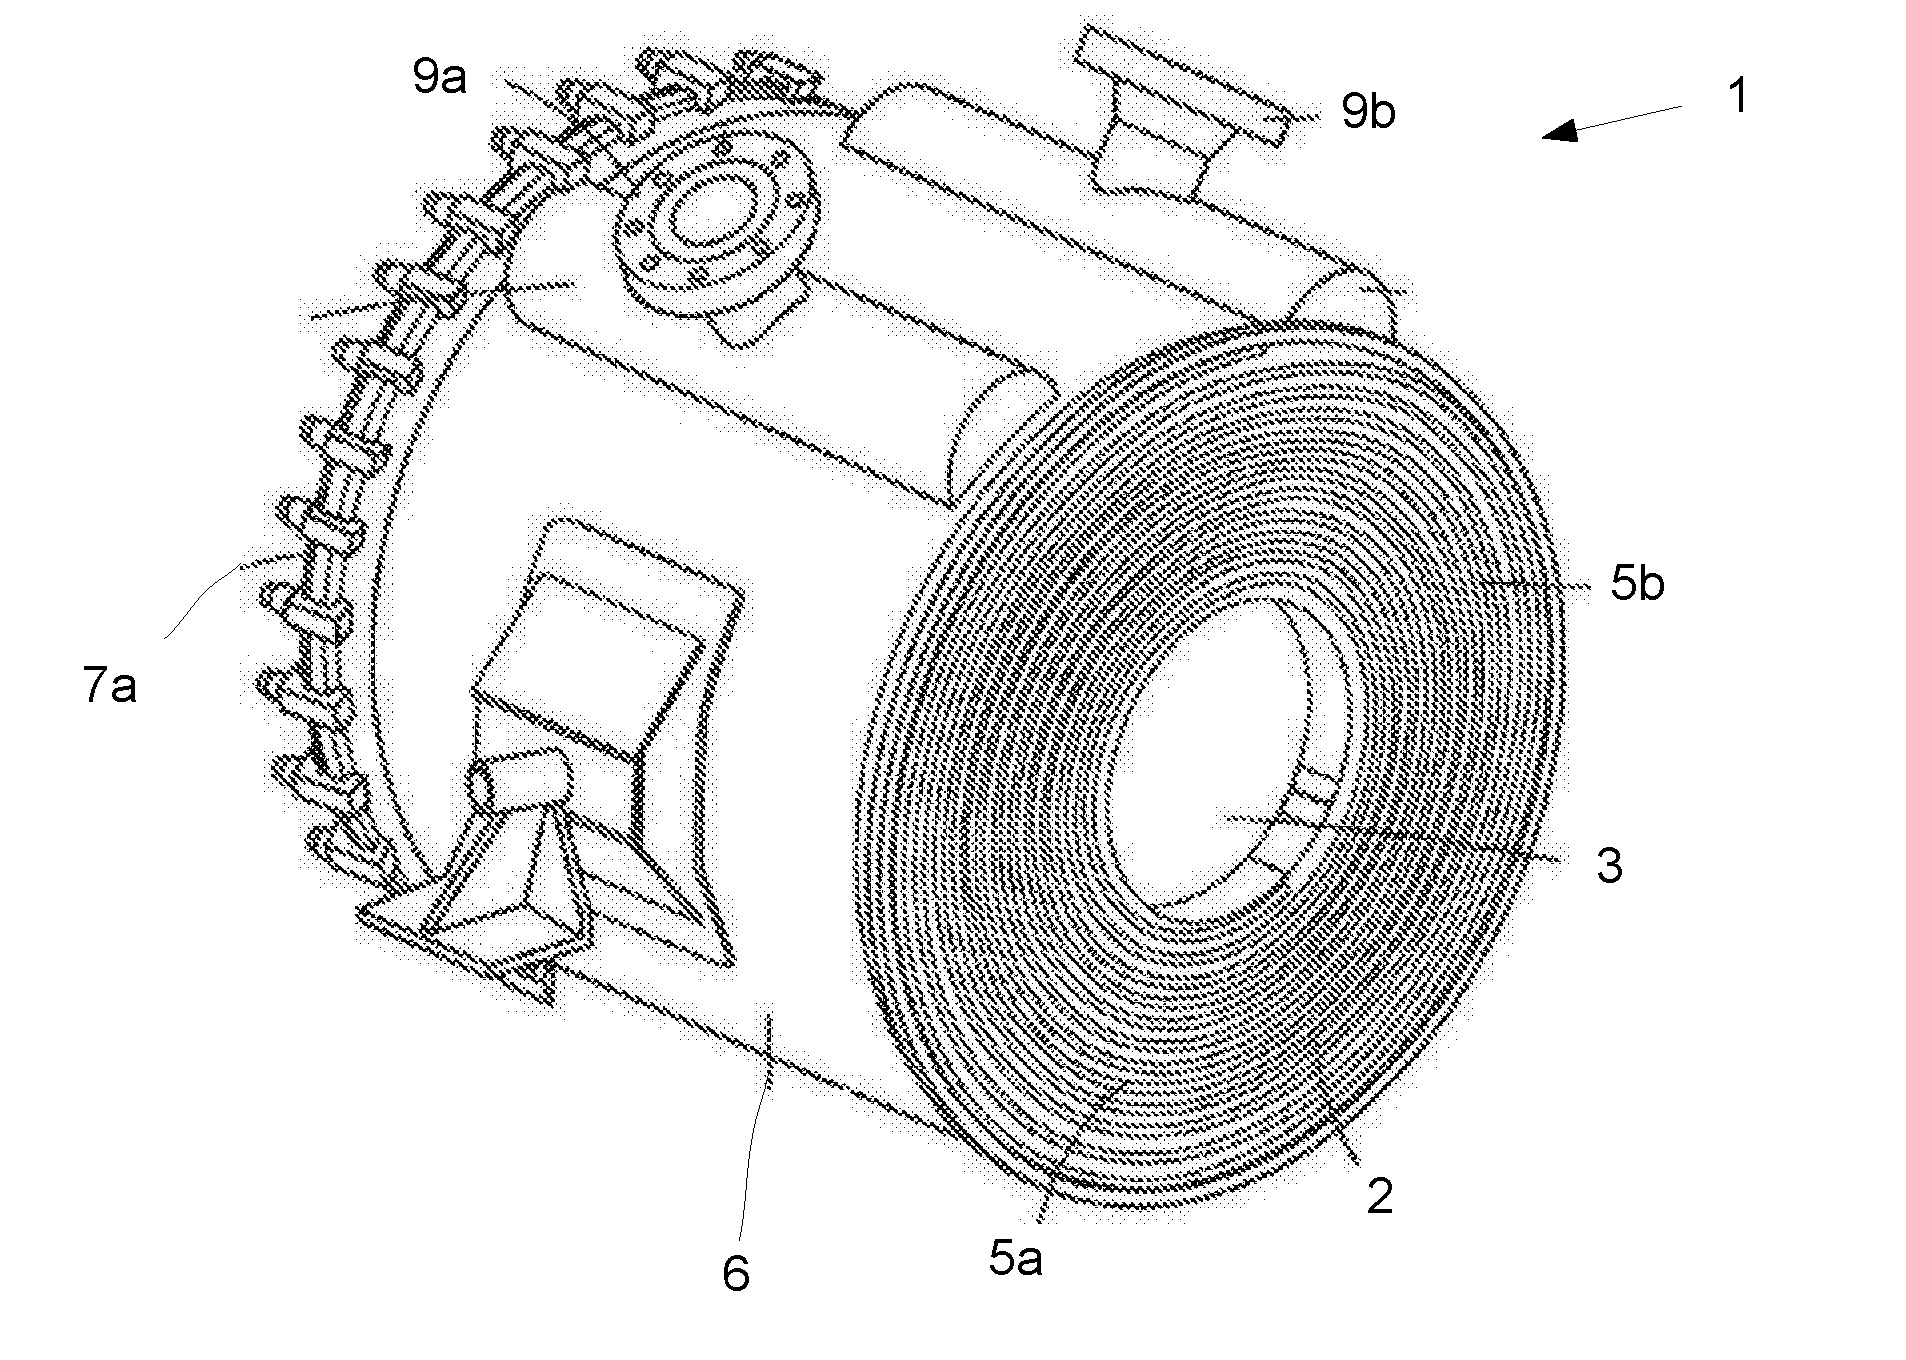 Spiral heat exchanger with Anti-fouling properties